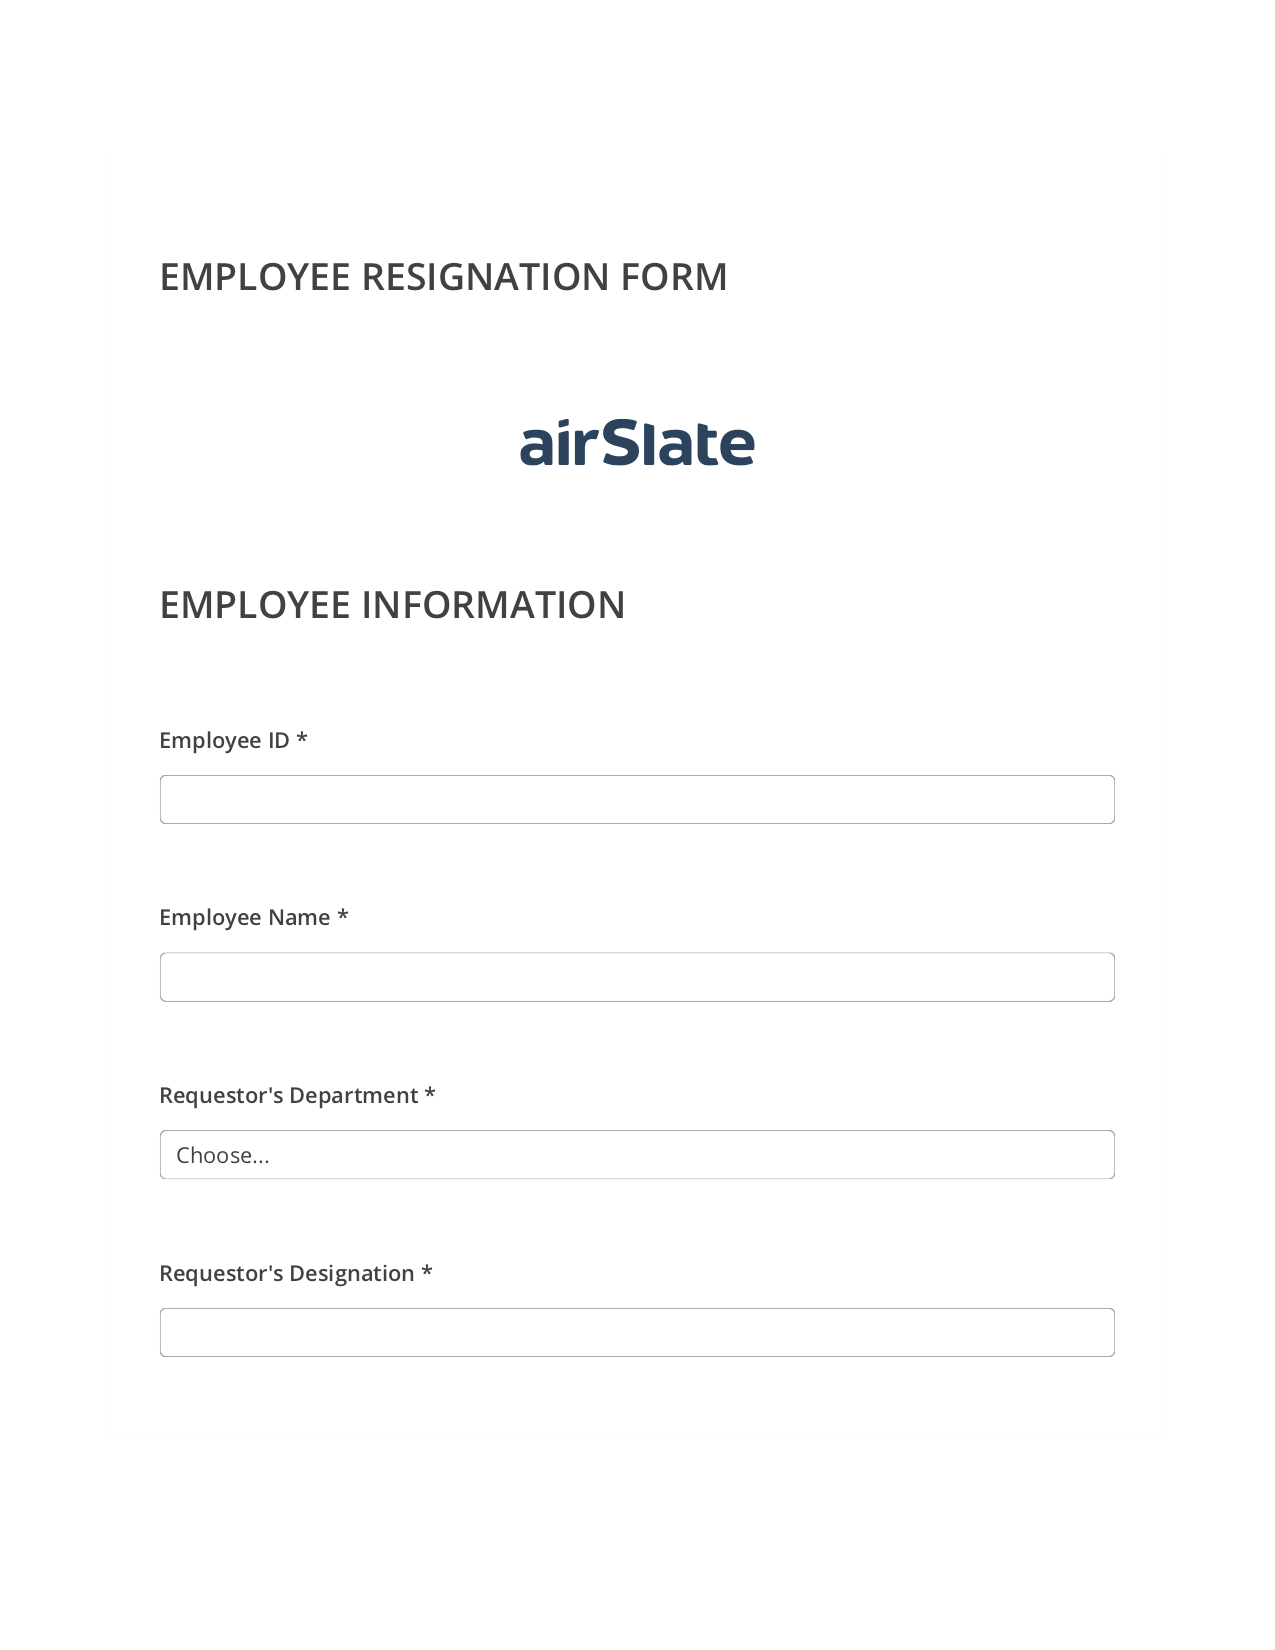 Employee Resignation Request Workflow System Bot - Slack Two-Way Binding Bot, Create MS Dynamics 365 Records Bot, OneDrive Bot